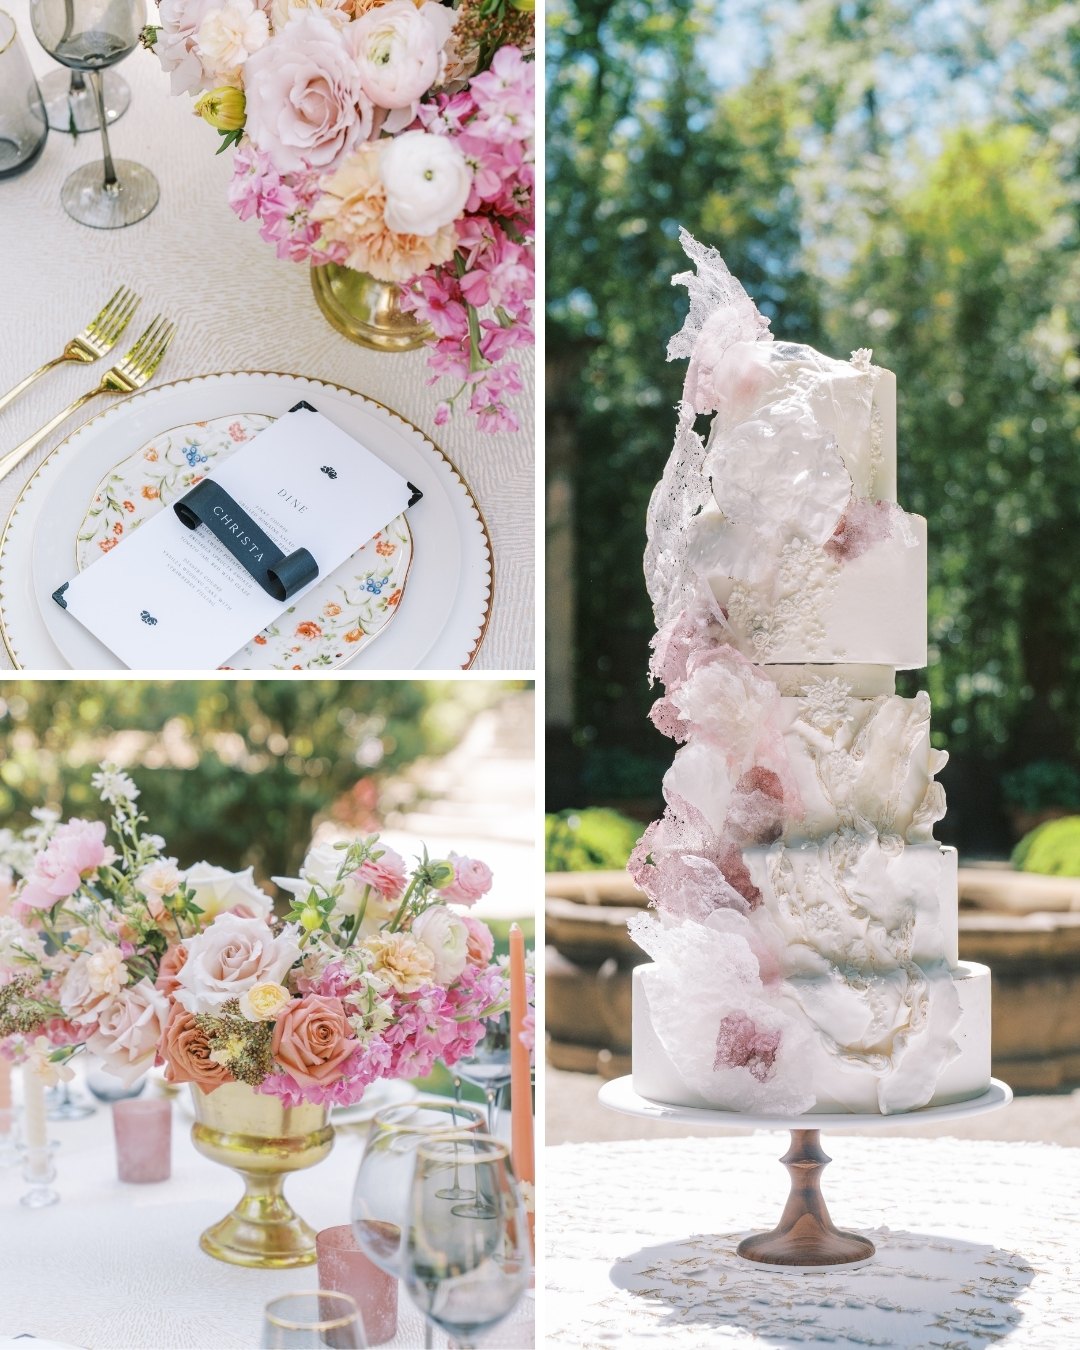 Collage of a 5 tiered wedding cake and rose centerpieces for a wedding reception